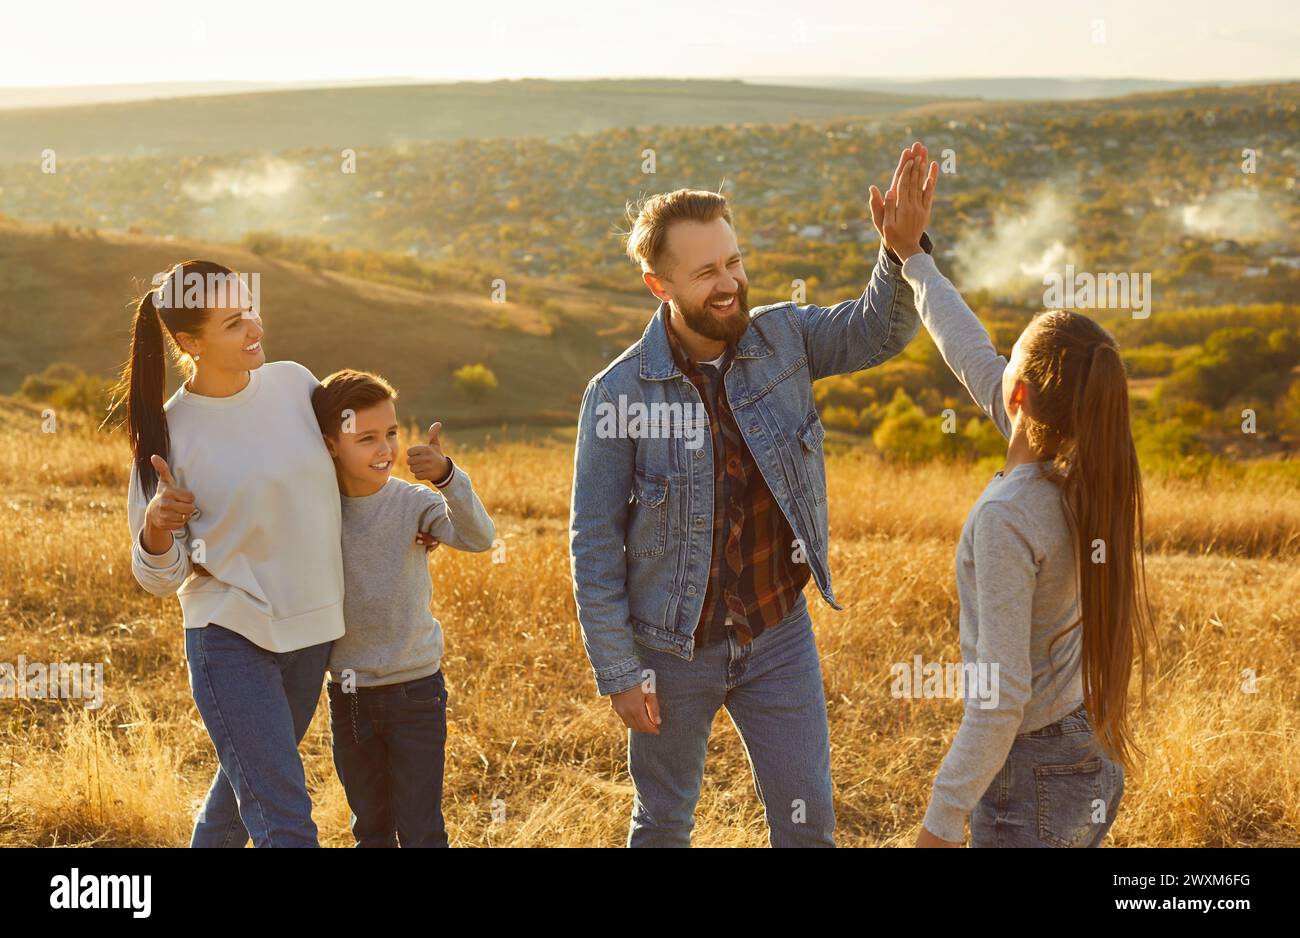 Happy friendly family nature outdoor trip, high five gesture, spending weekend holiday together Stock Photo